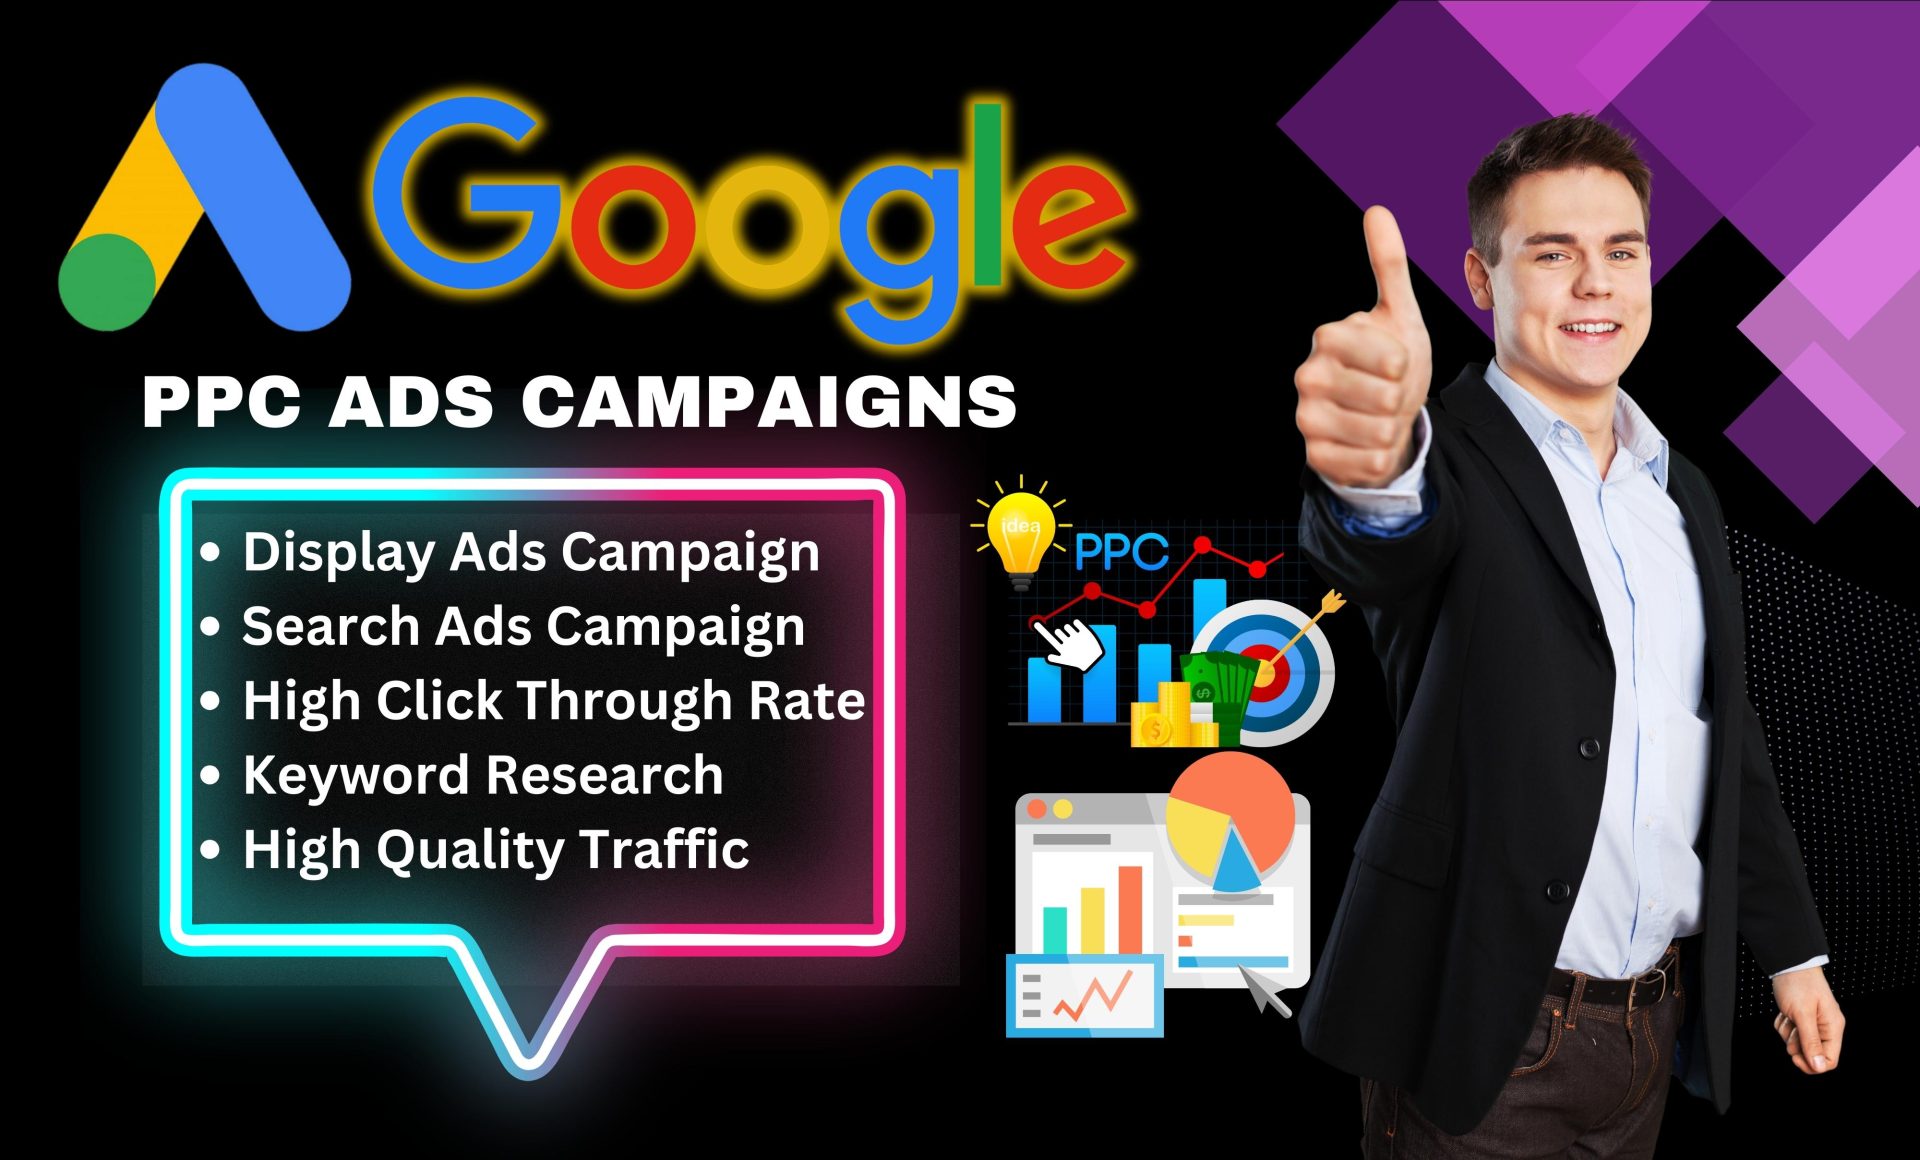 32350I will set up and manage Facebook ads as marketing manager for leads and sales